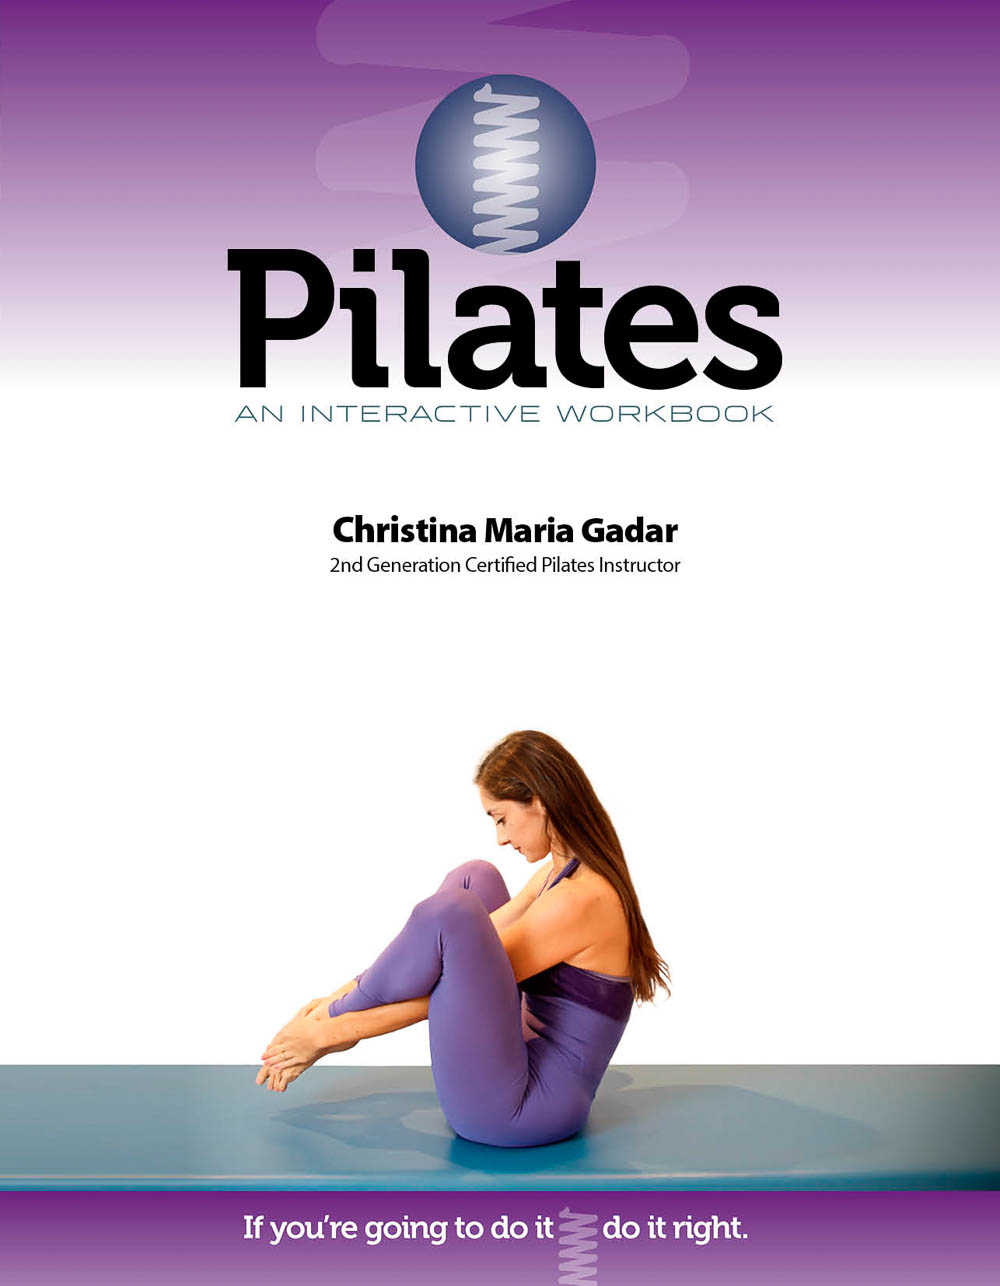 Thanks Order of the Pilates Exercises: Transitions on the Mat! - Pilates  Andrea